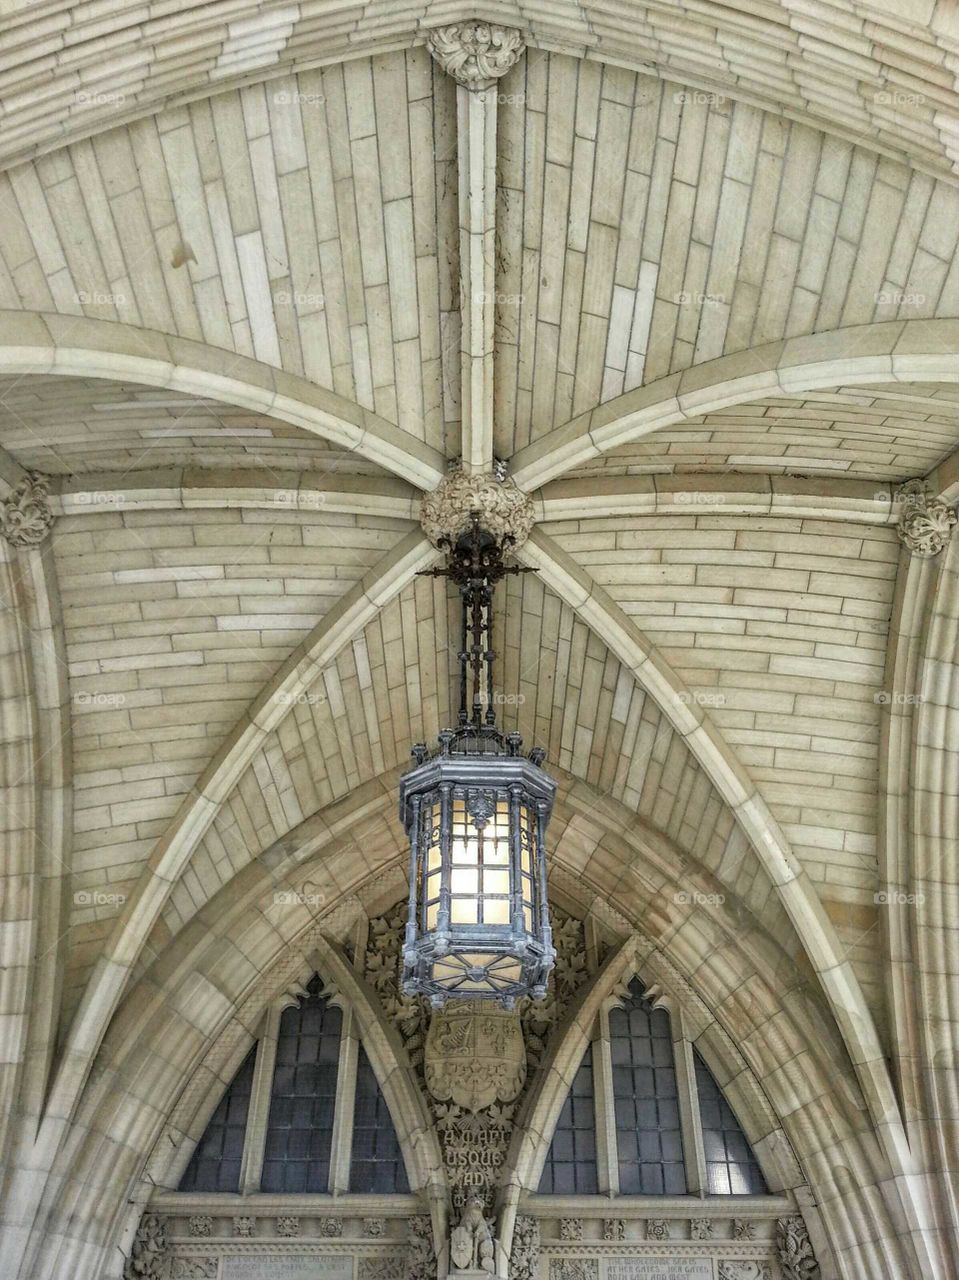 Ceiling of the entrance of the parliament of Ottawa and old wrought iron lamp